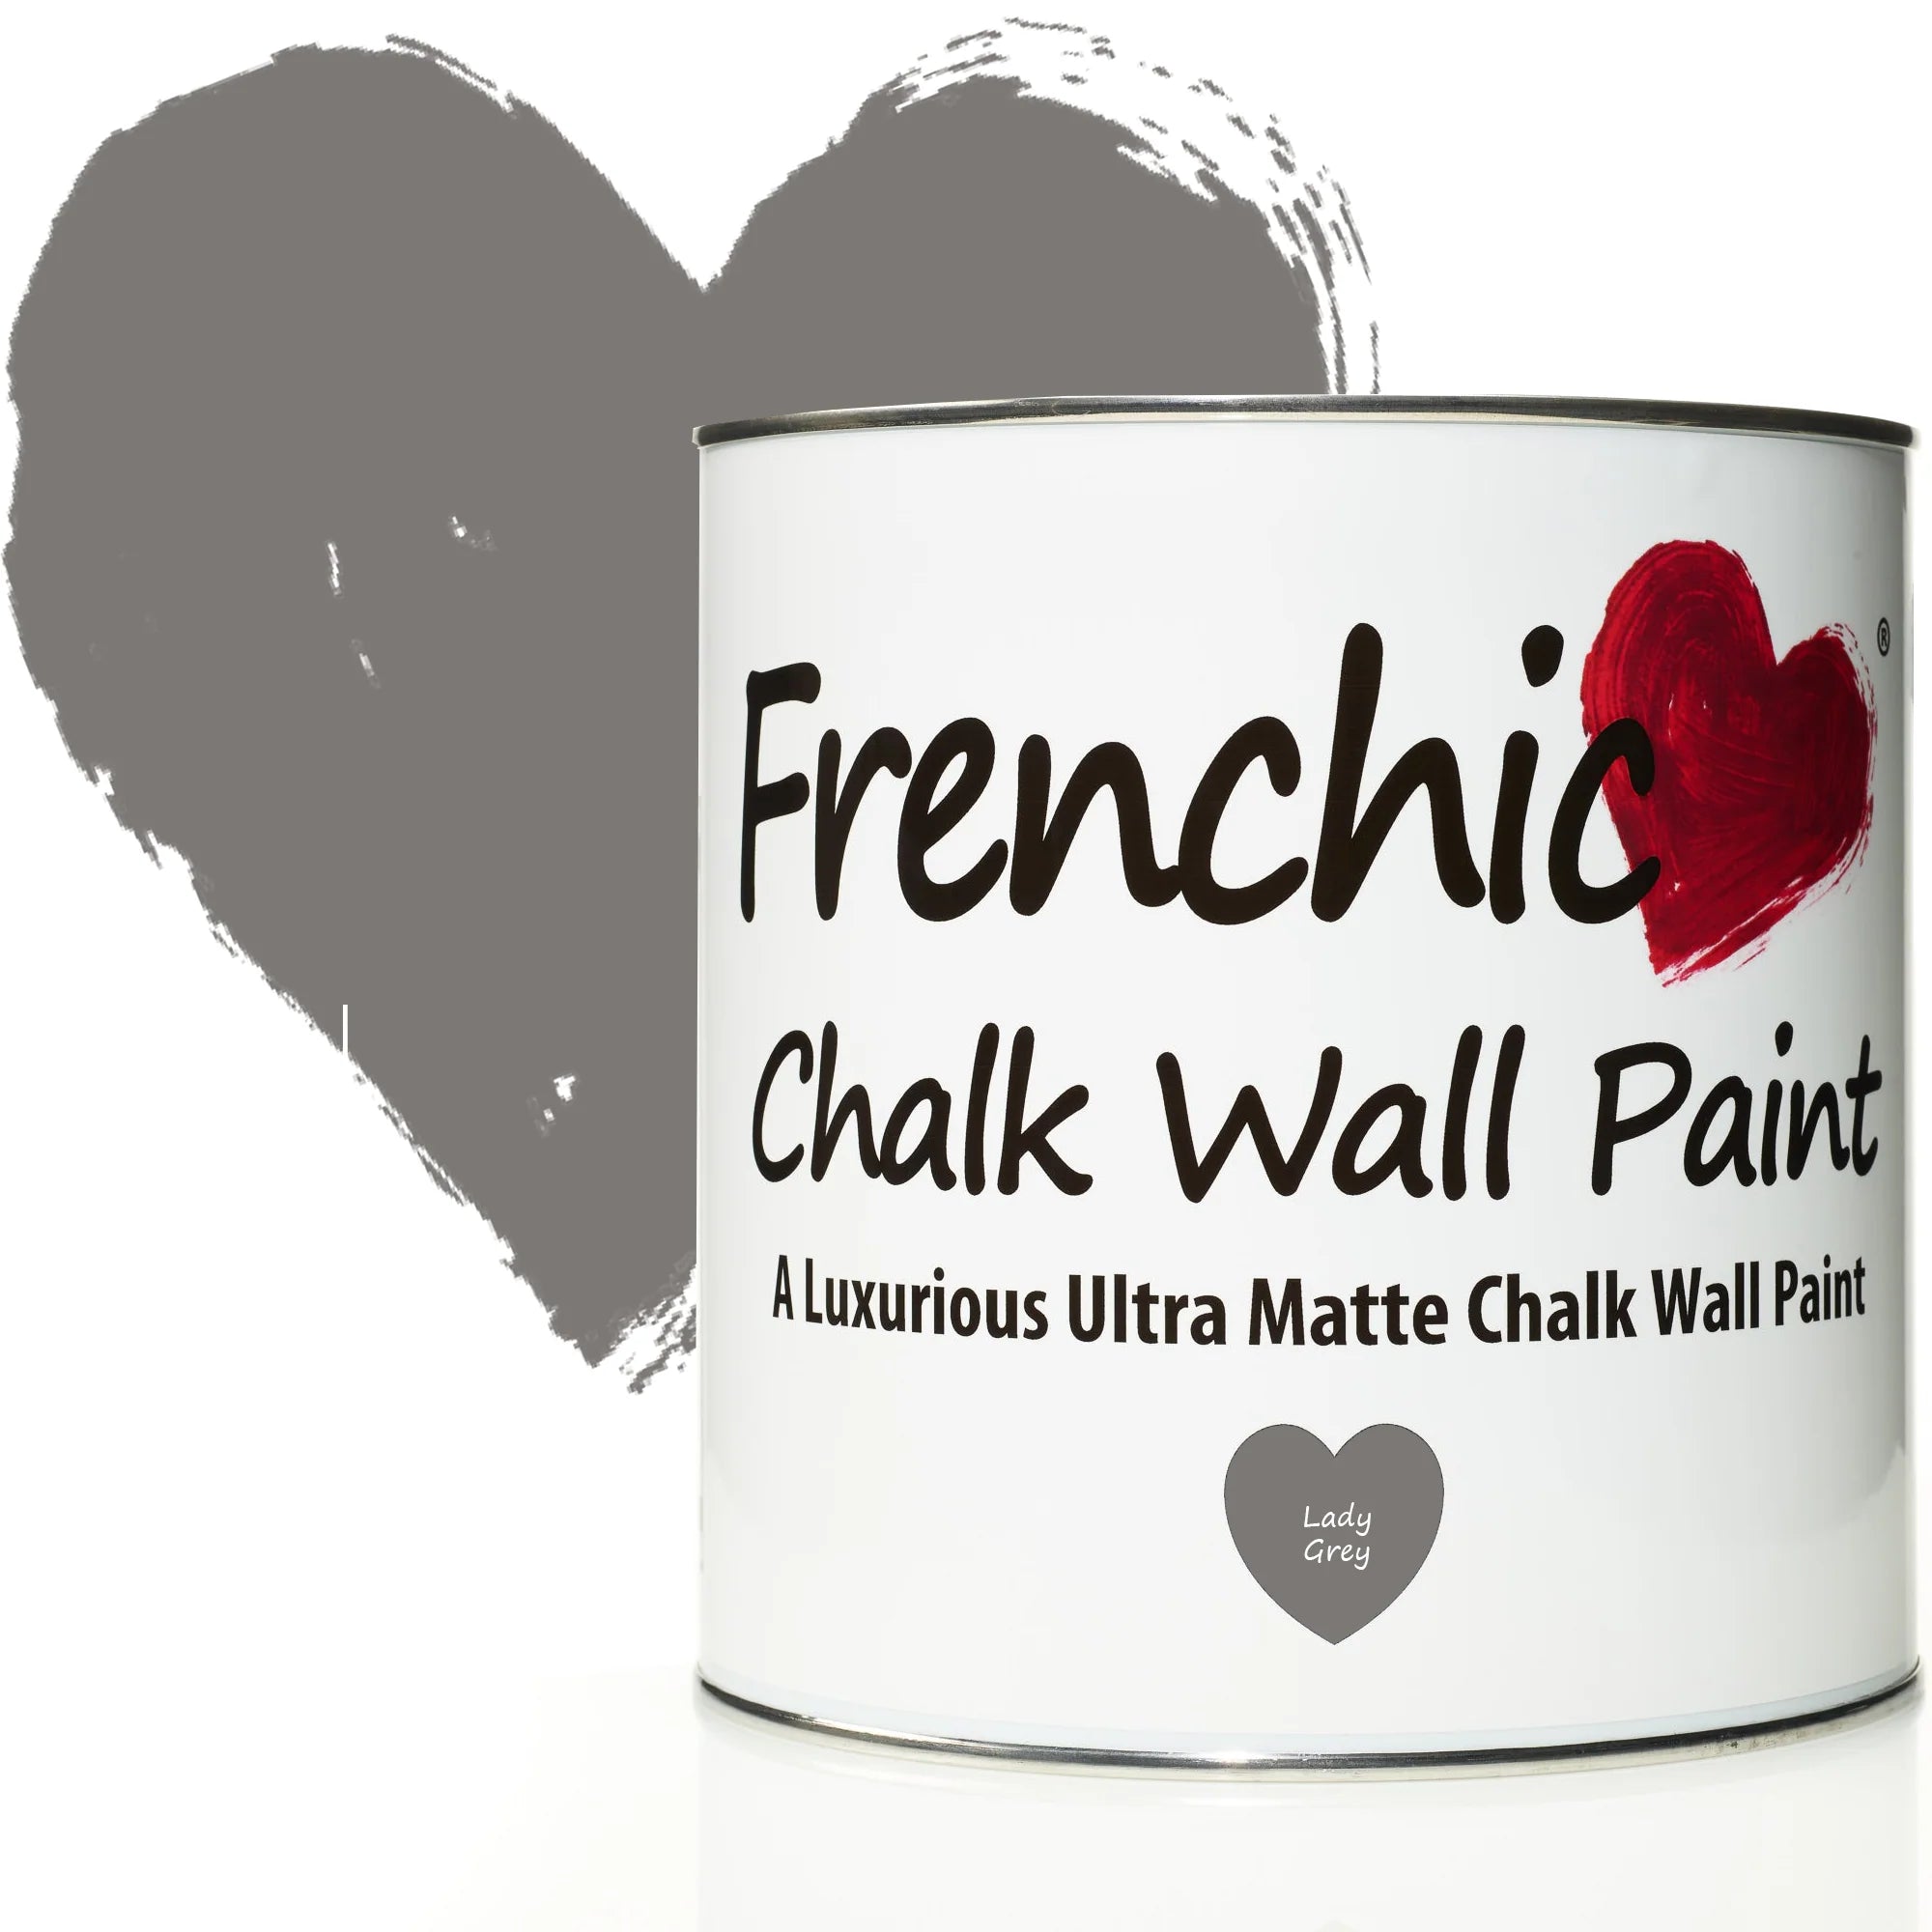 Frenchic Paint Lady Grey Wall Paint 2.5L Frenchic Paint Chalk Wall Paint Range by Weirs of Baggot Street Irelands Largest and most Trusted Stockist of Frenchic Paint. Shop online for Nationwide and Same Day Dublin Delivery